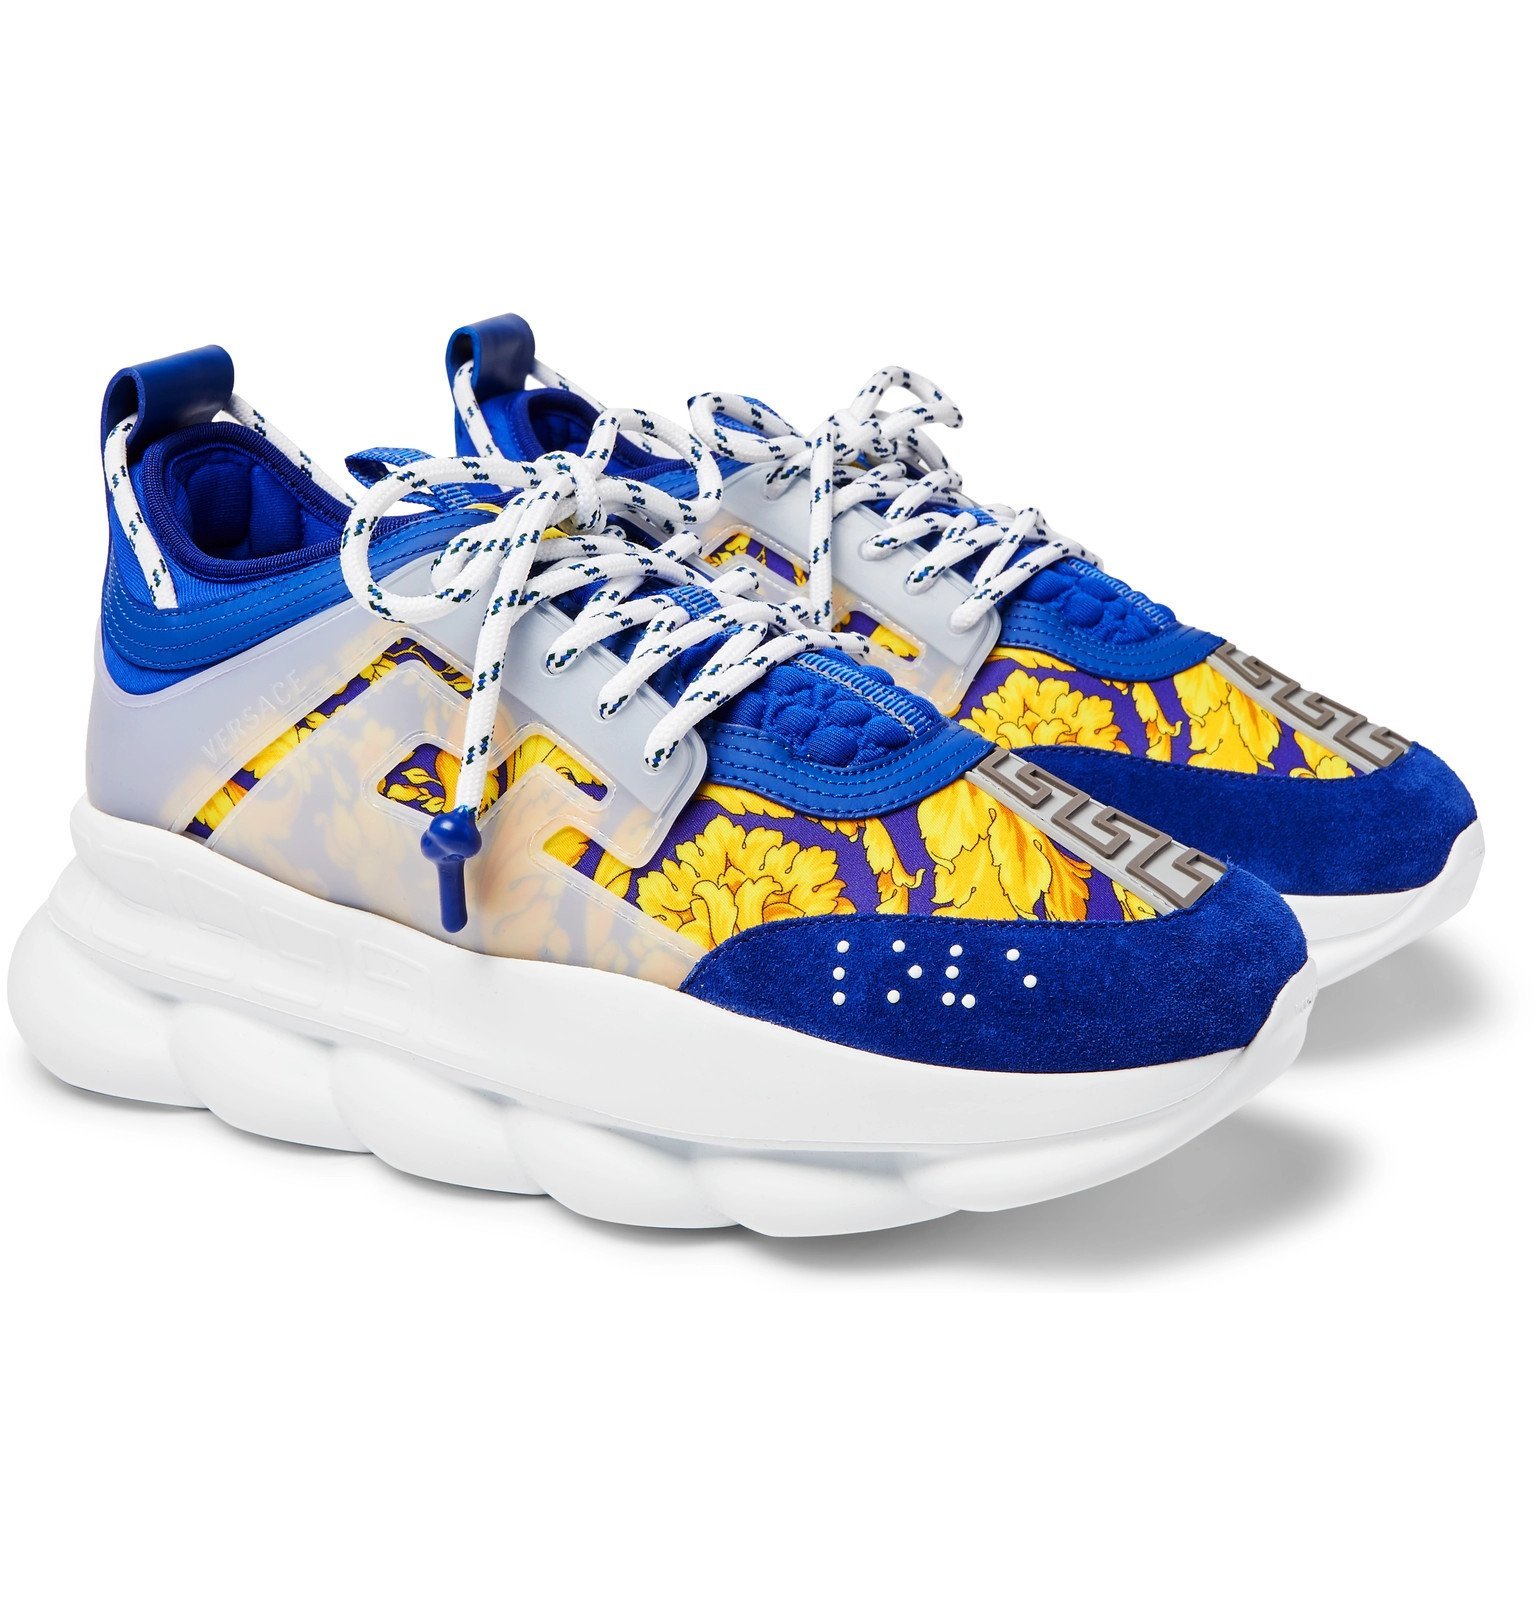 versace chain reaction blue and white